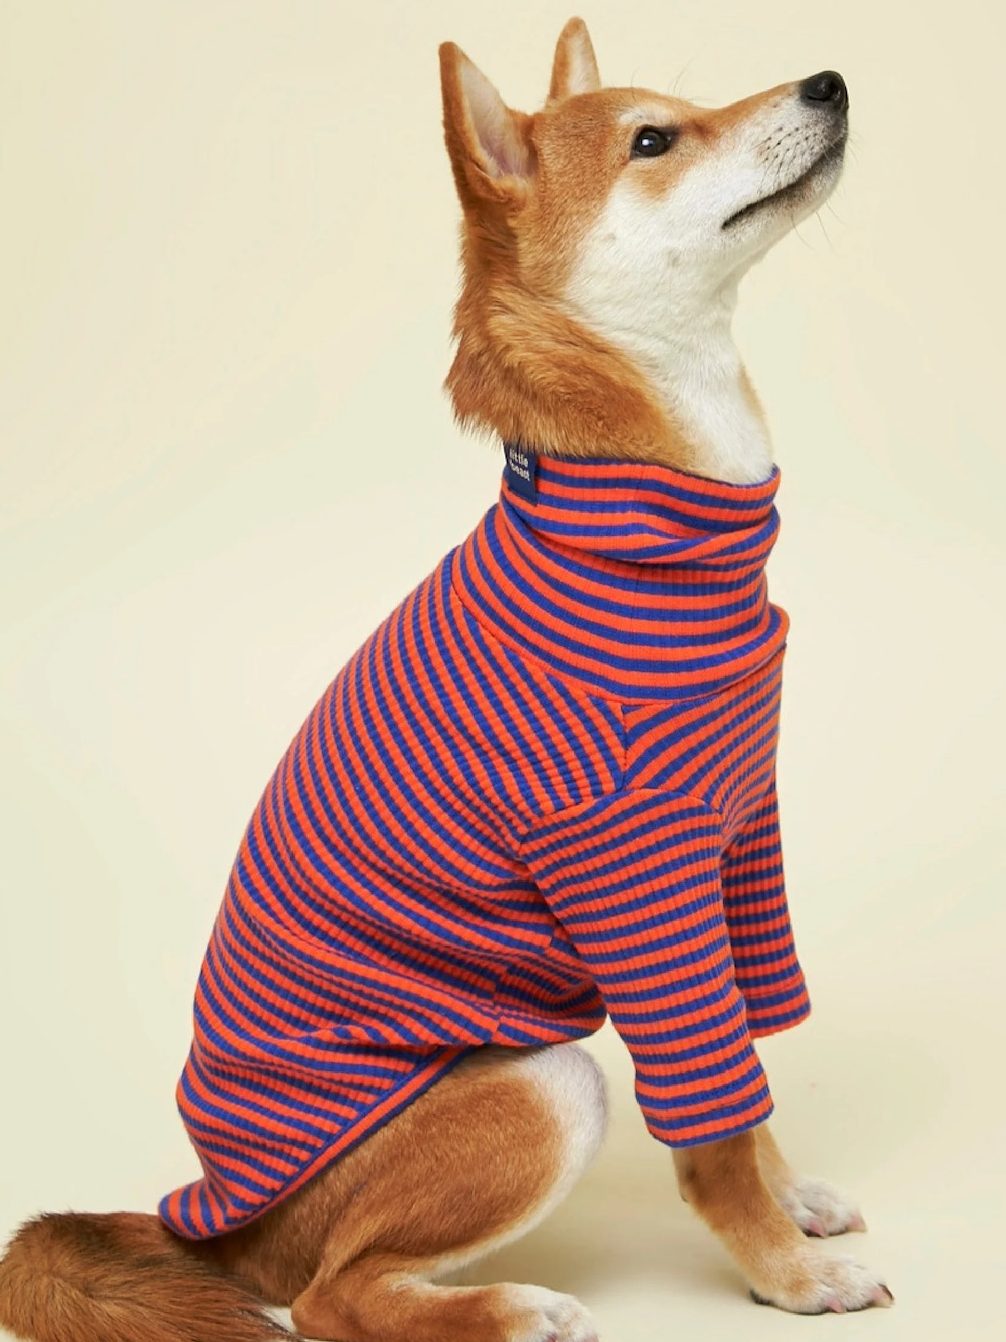 San Diego magazine holiday gift guide item Knickerbocker Sweatshirt for dogs from Little Beast